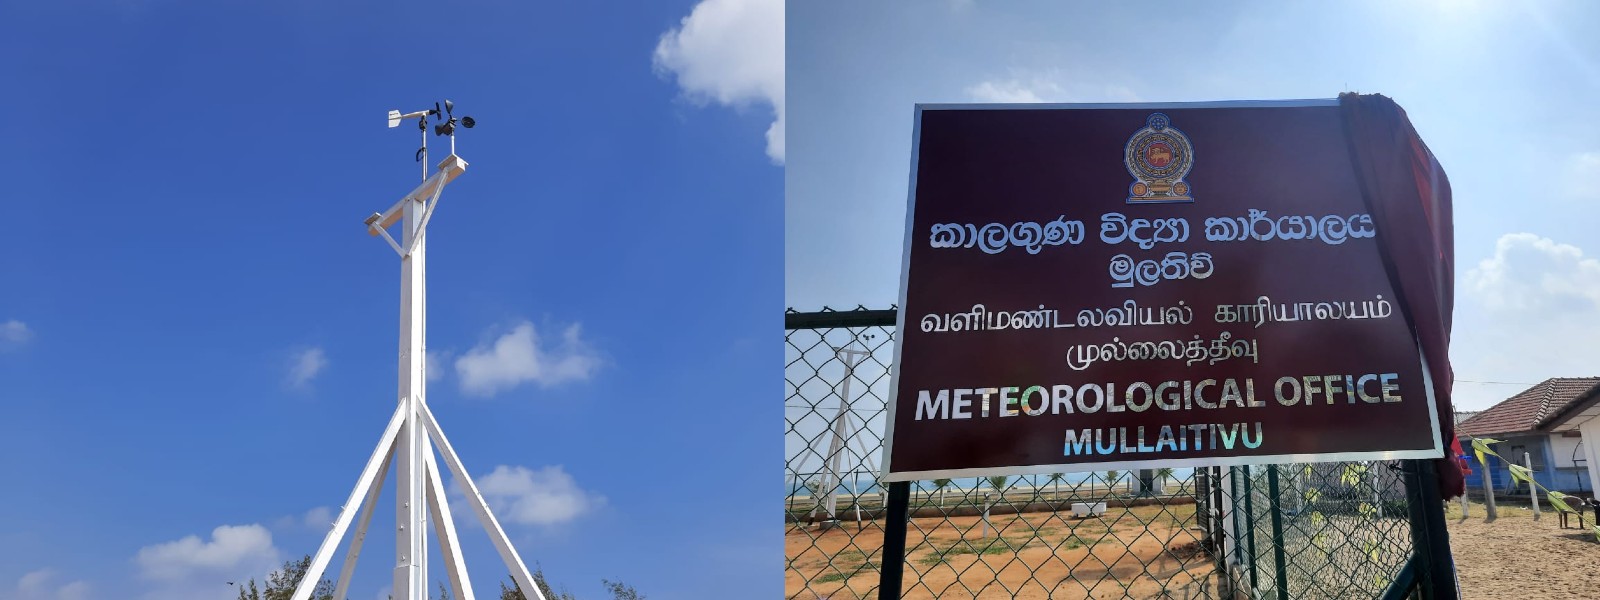 Met Office opened in Mullaithivu after 31 years